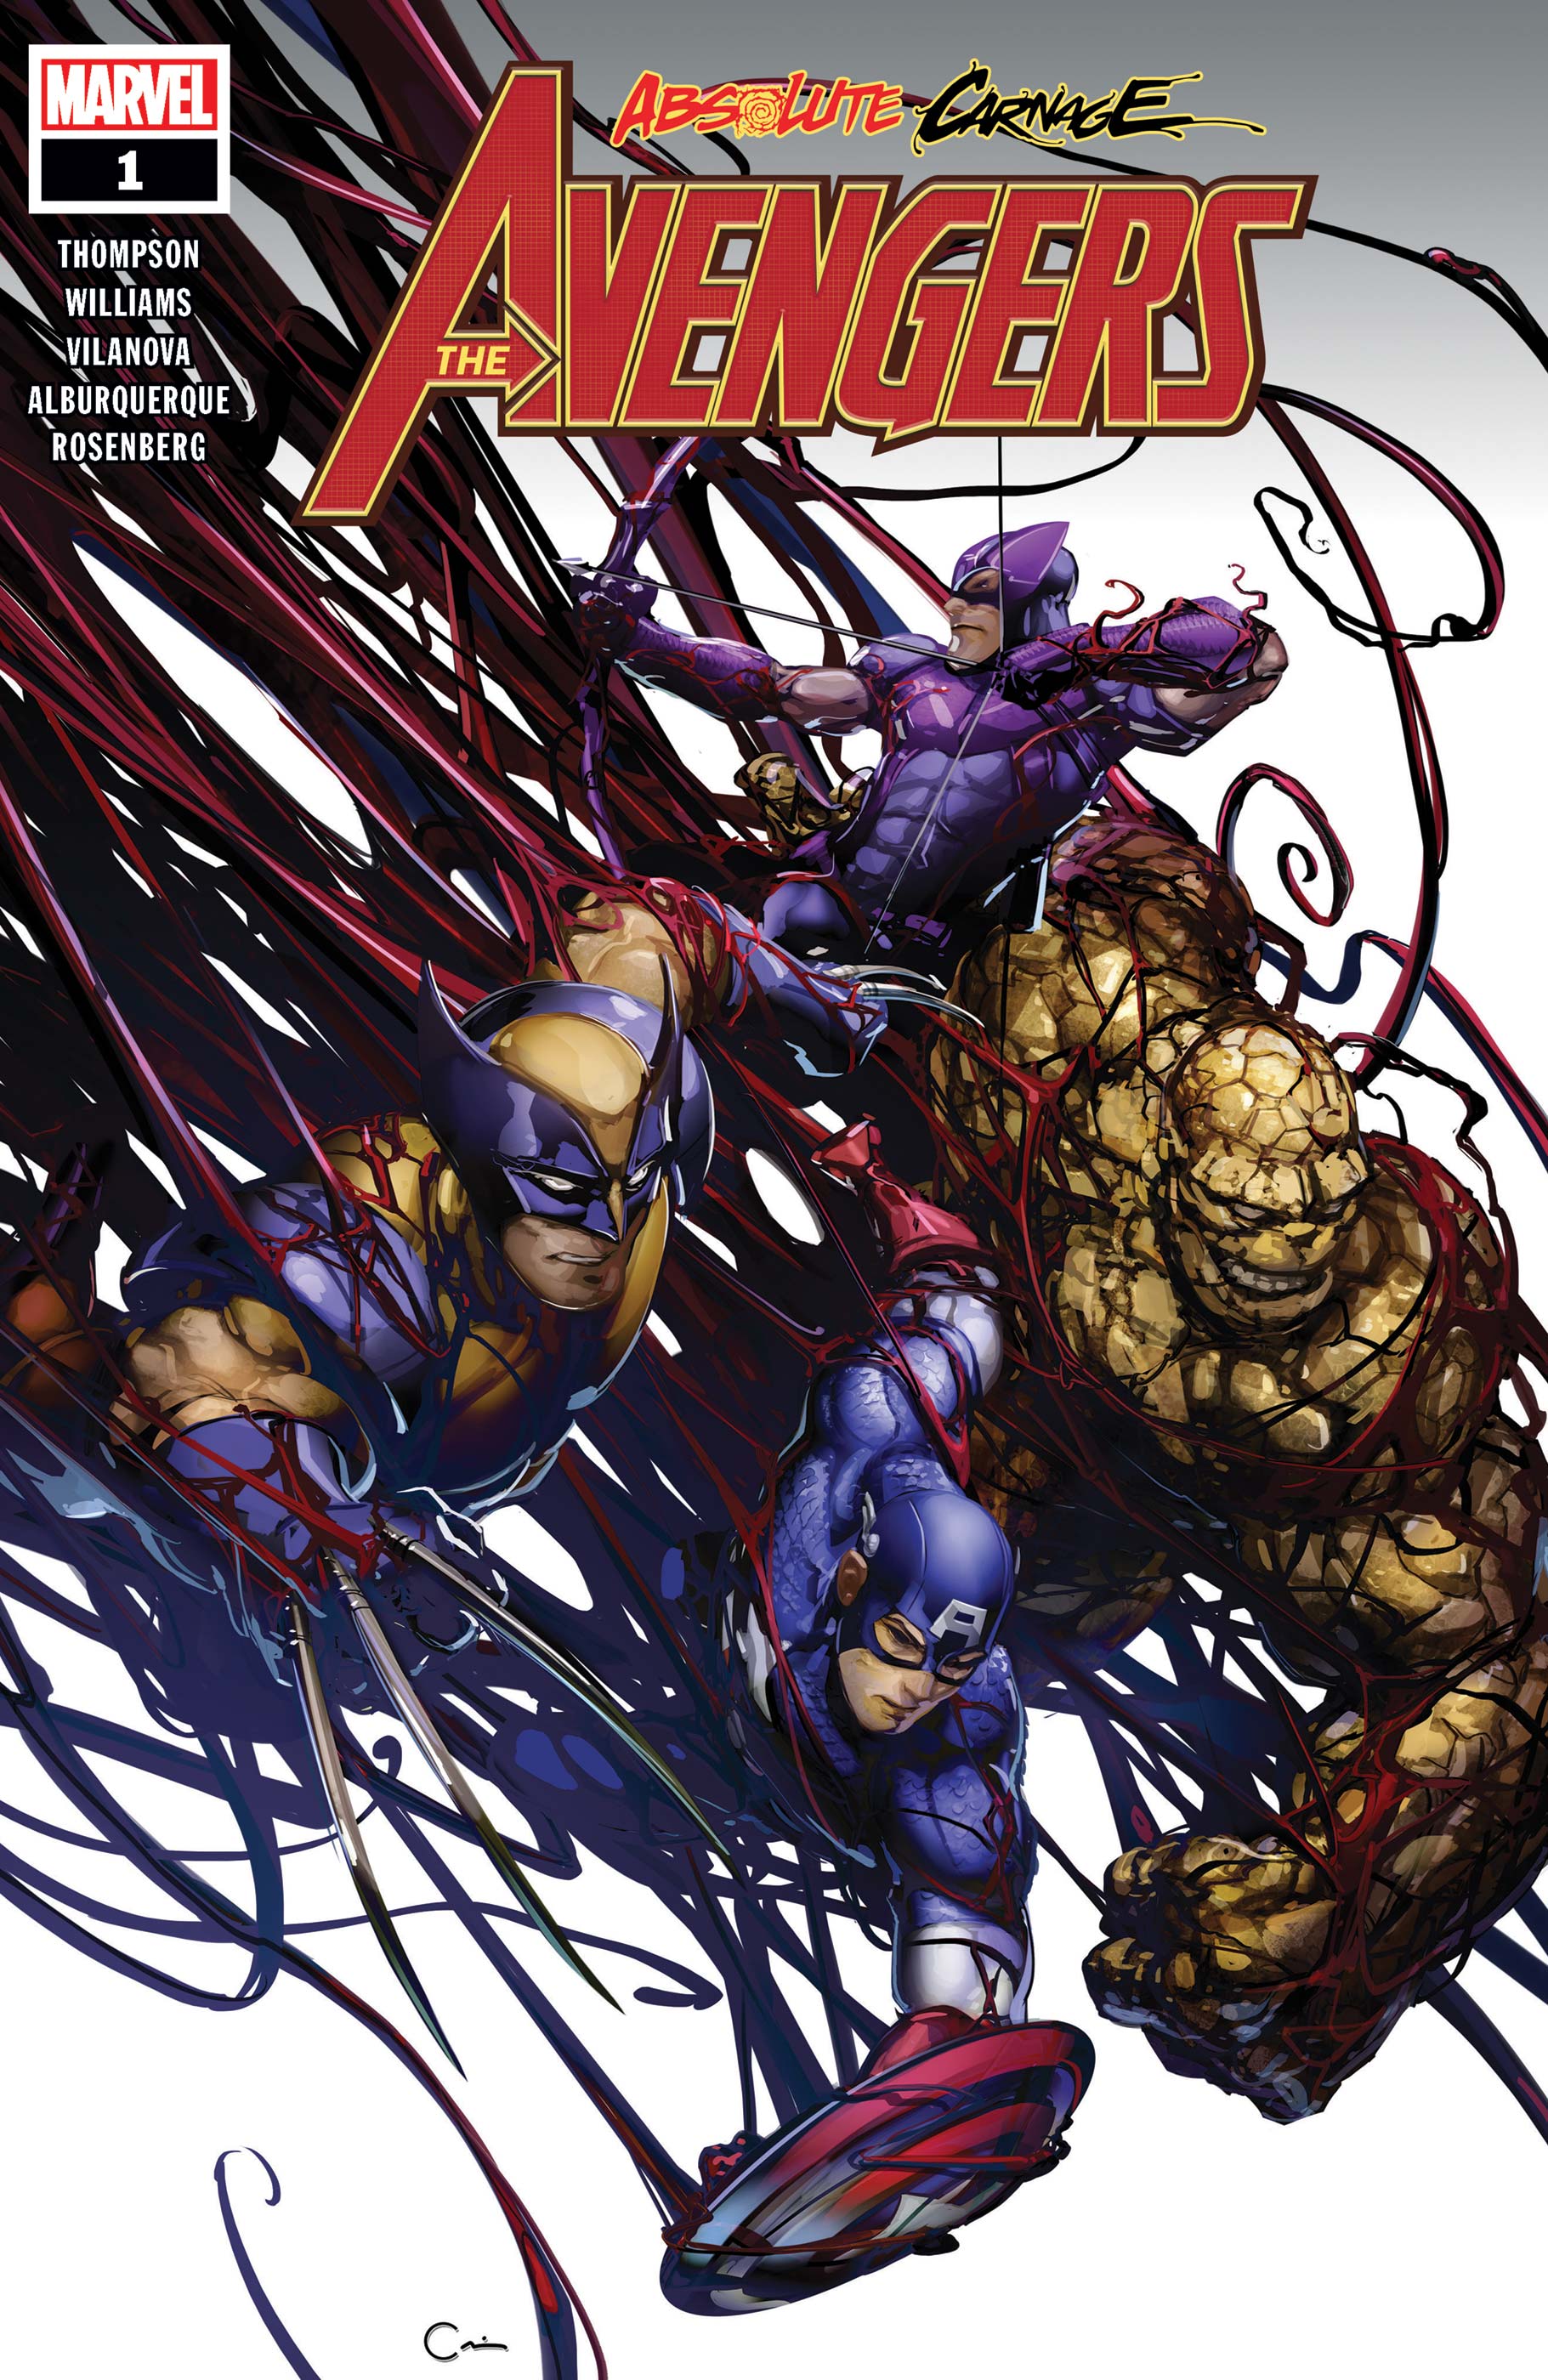 ABSOLUTE CARNAGE AVENGERS #1 AC 25/09/2019